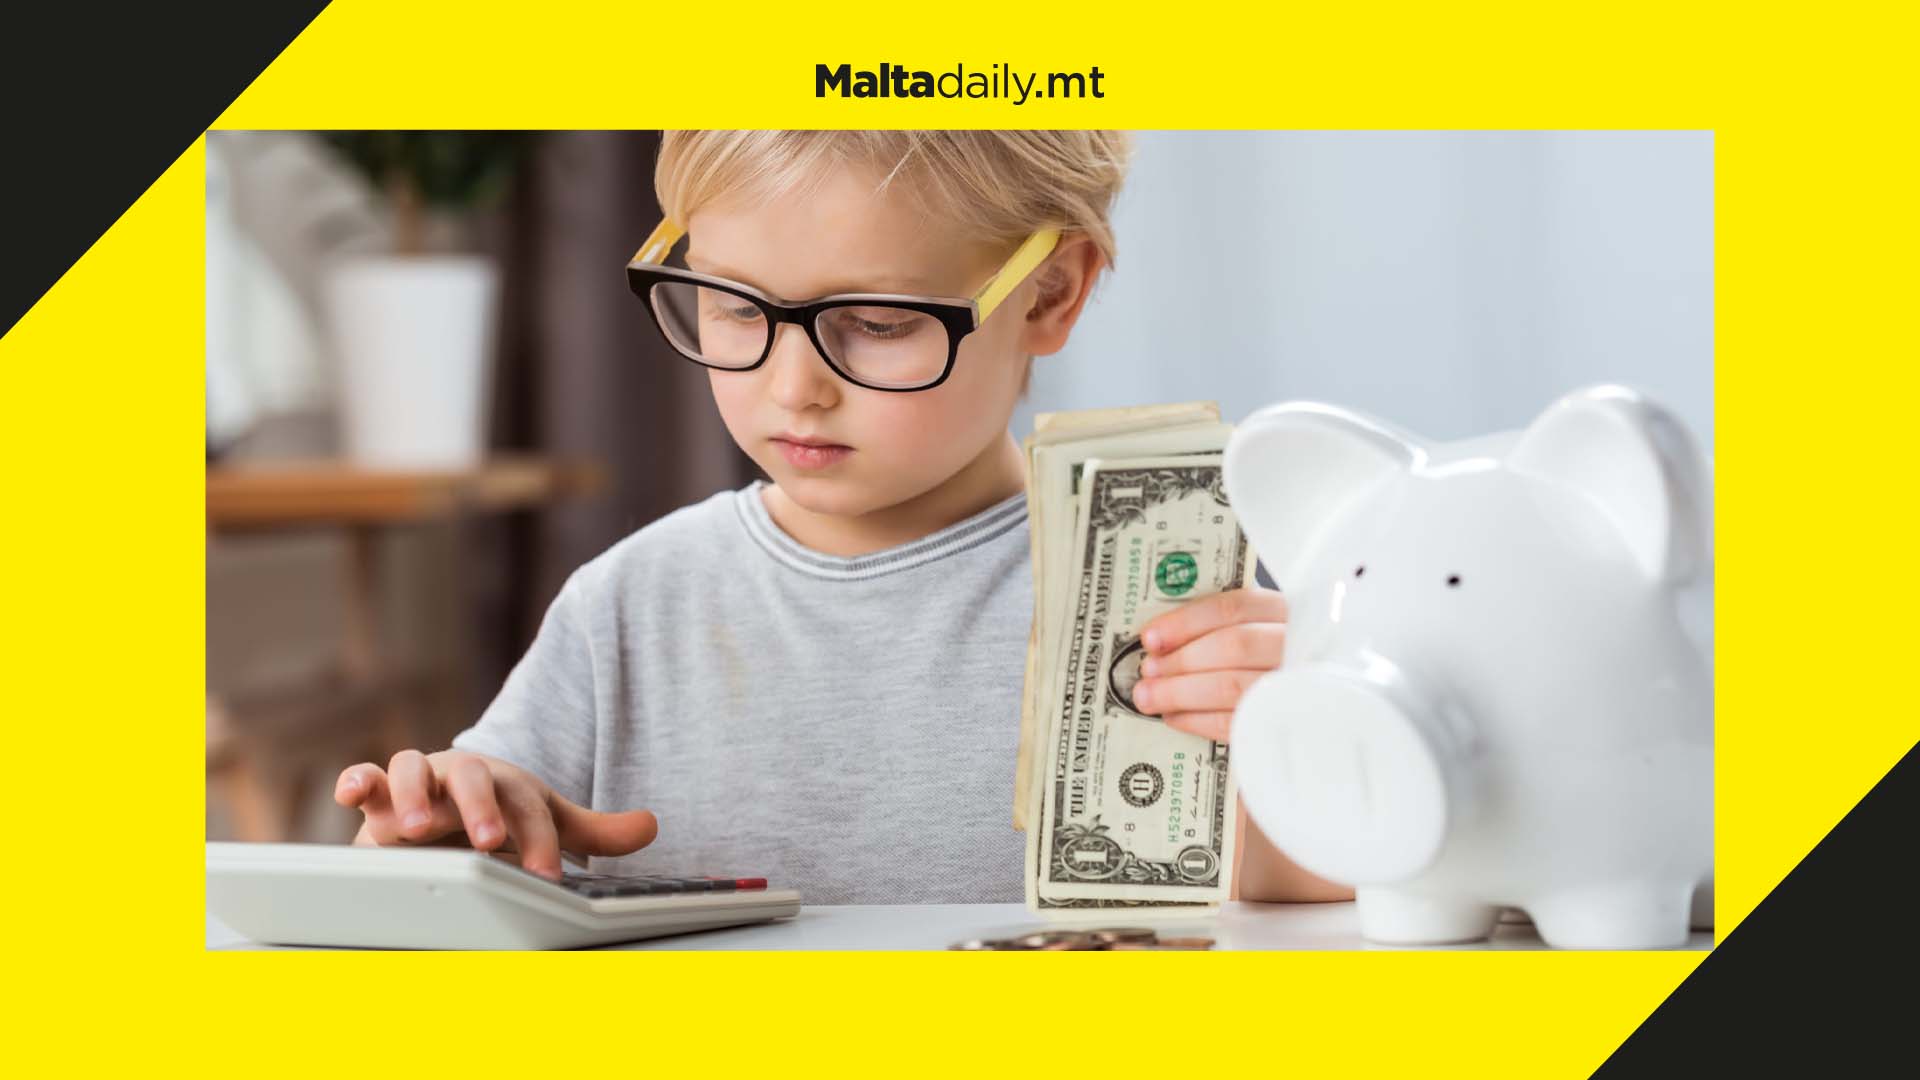 $300,00 to raise a child in US - how does Malta compare?